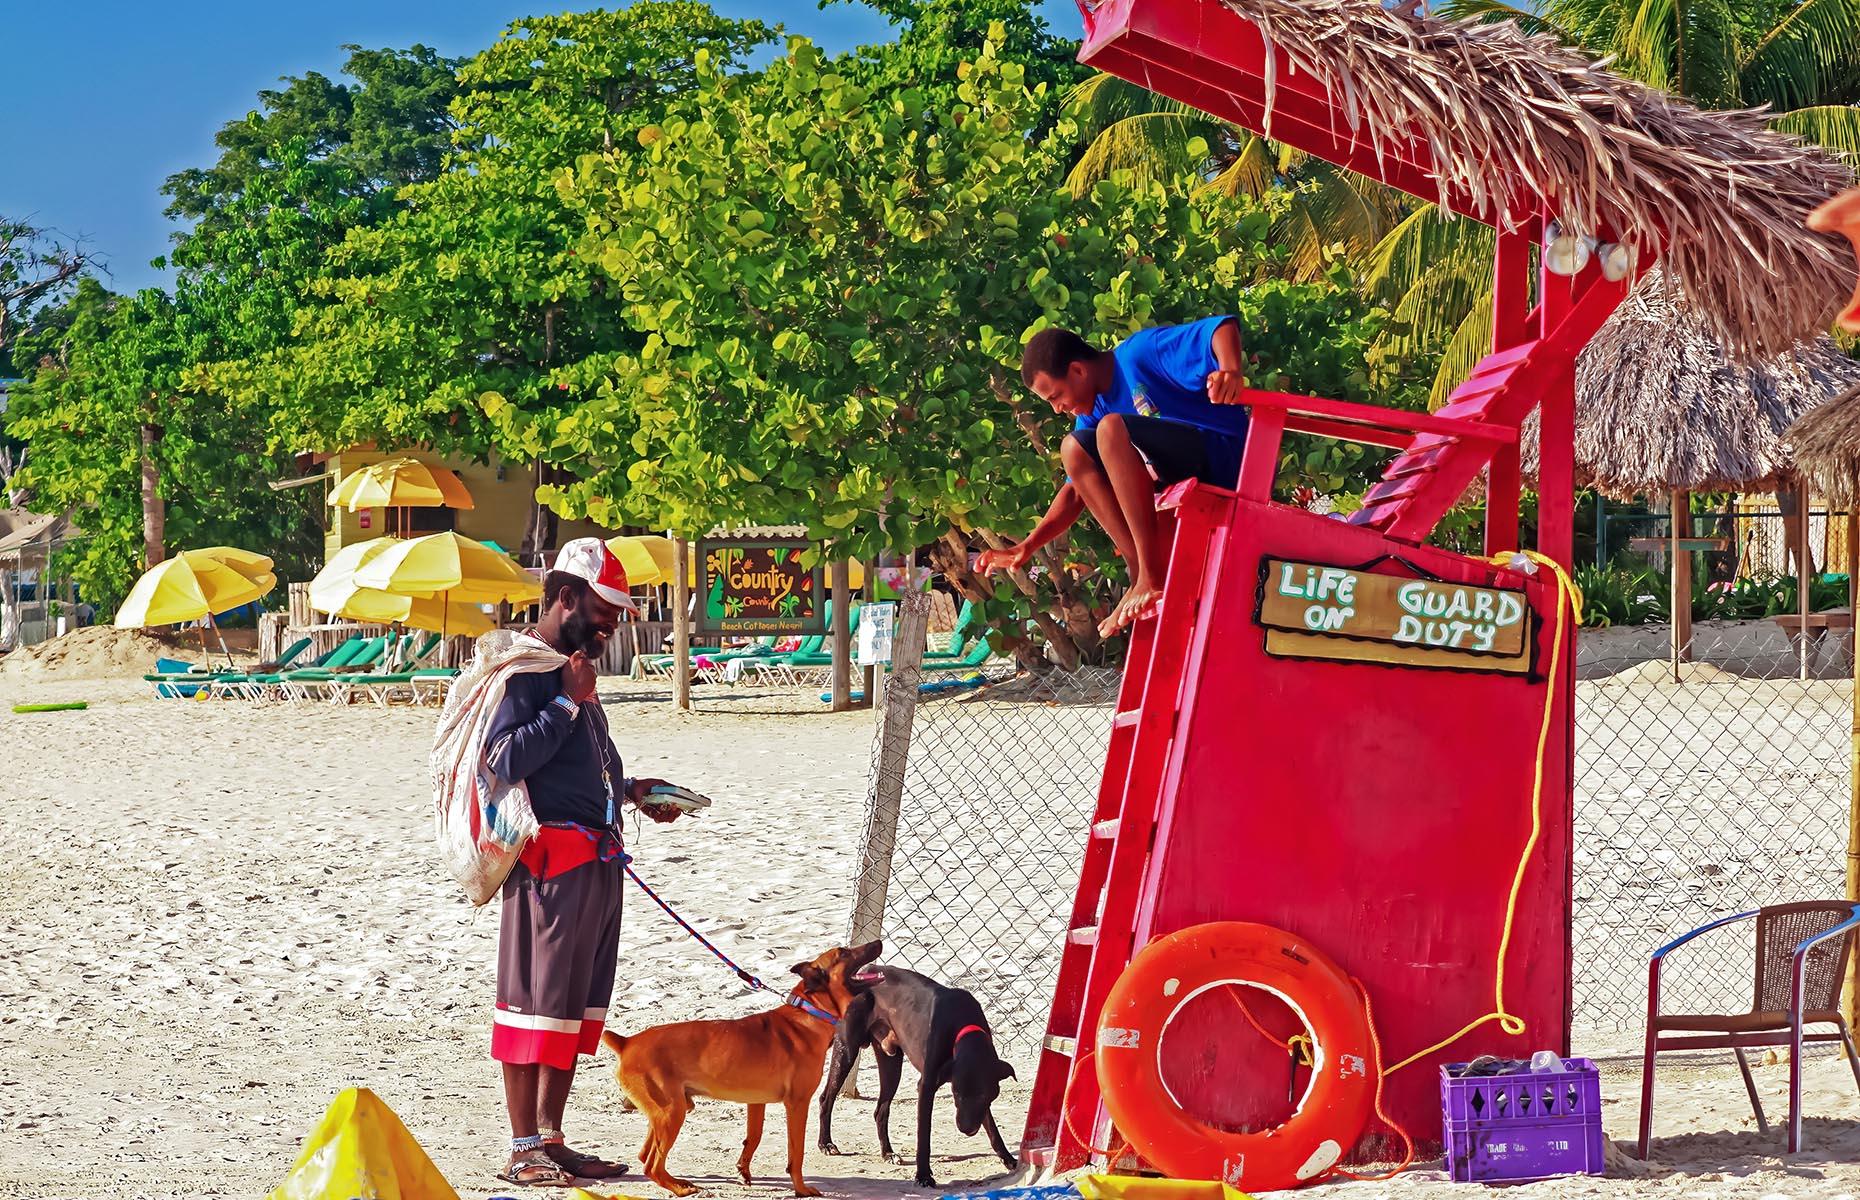 <p>With mile upon mile of white sand and a colorful <a href="http://www.loveexploring.com/guides/91212/visit-jamaica-sandals-holidays-2020">Jamaican</a> vibe, Negril is quite unlike any other place in the Caribbean. The turquoise waters here are invitingly calm, and there’s a lagoon protected by coral reefs that is perfect for snorkeling and scuba diving. But it’s the lively bars and restaurants lining Seven Mile Beach that add color and life. Take a stroll along the sand as the sun is setting and let your senses lead you to your beach bar of choice.</p>